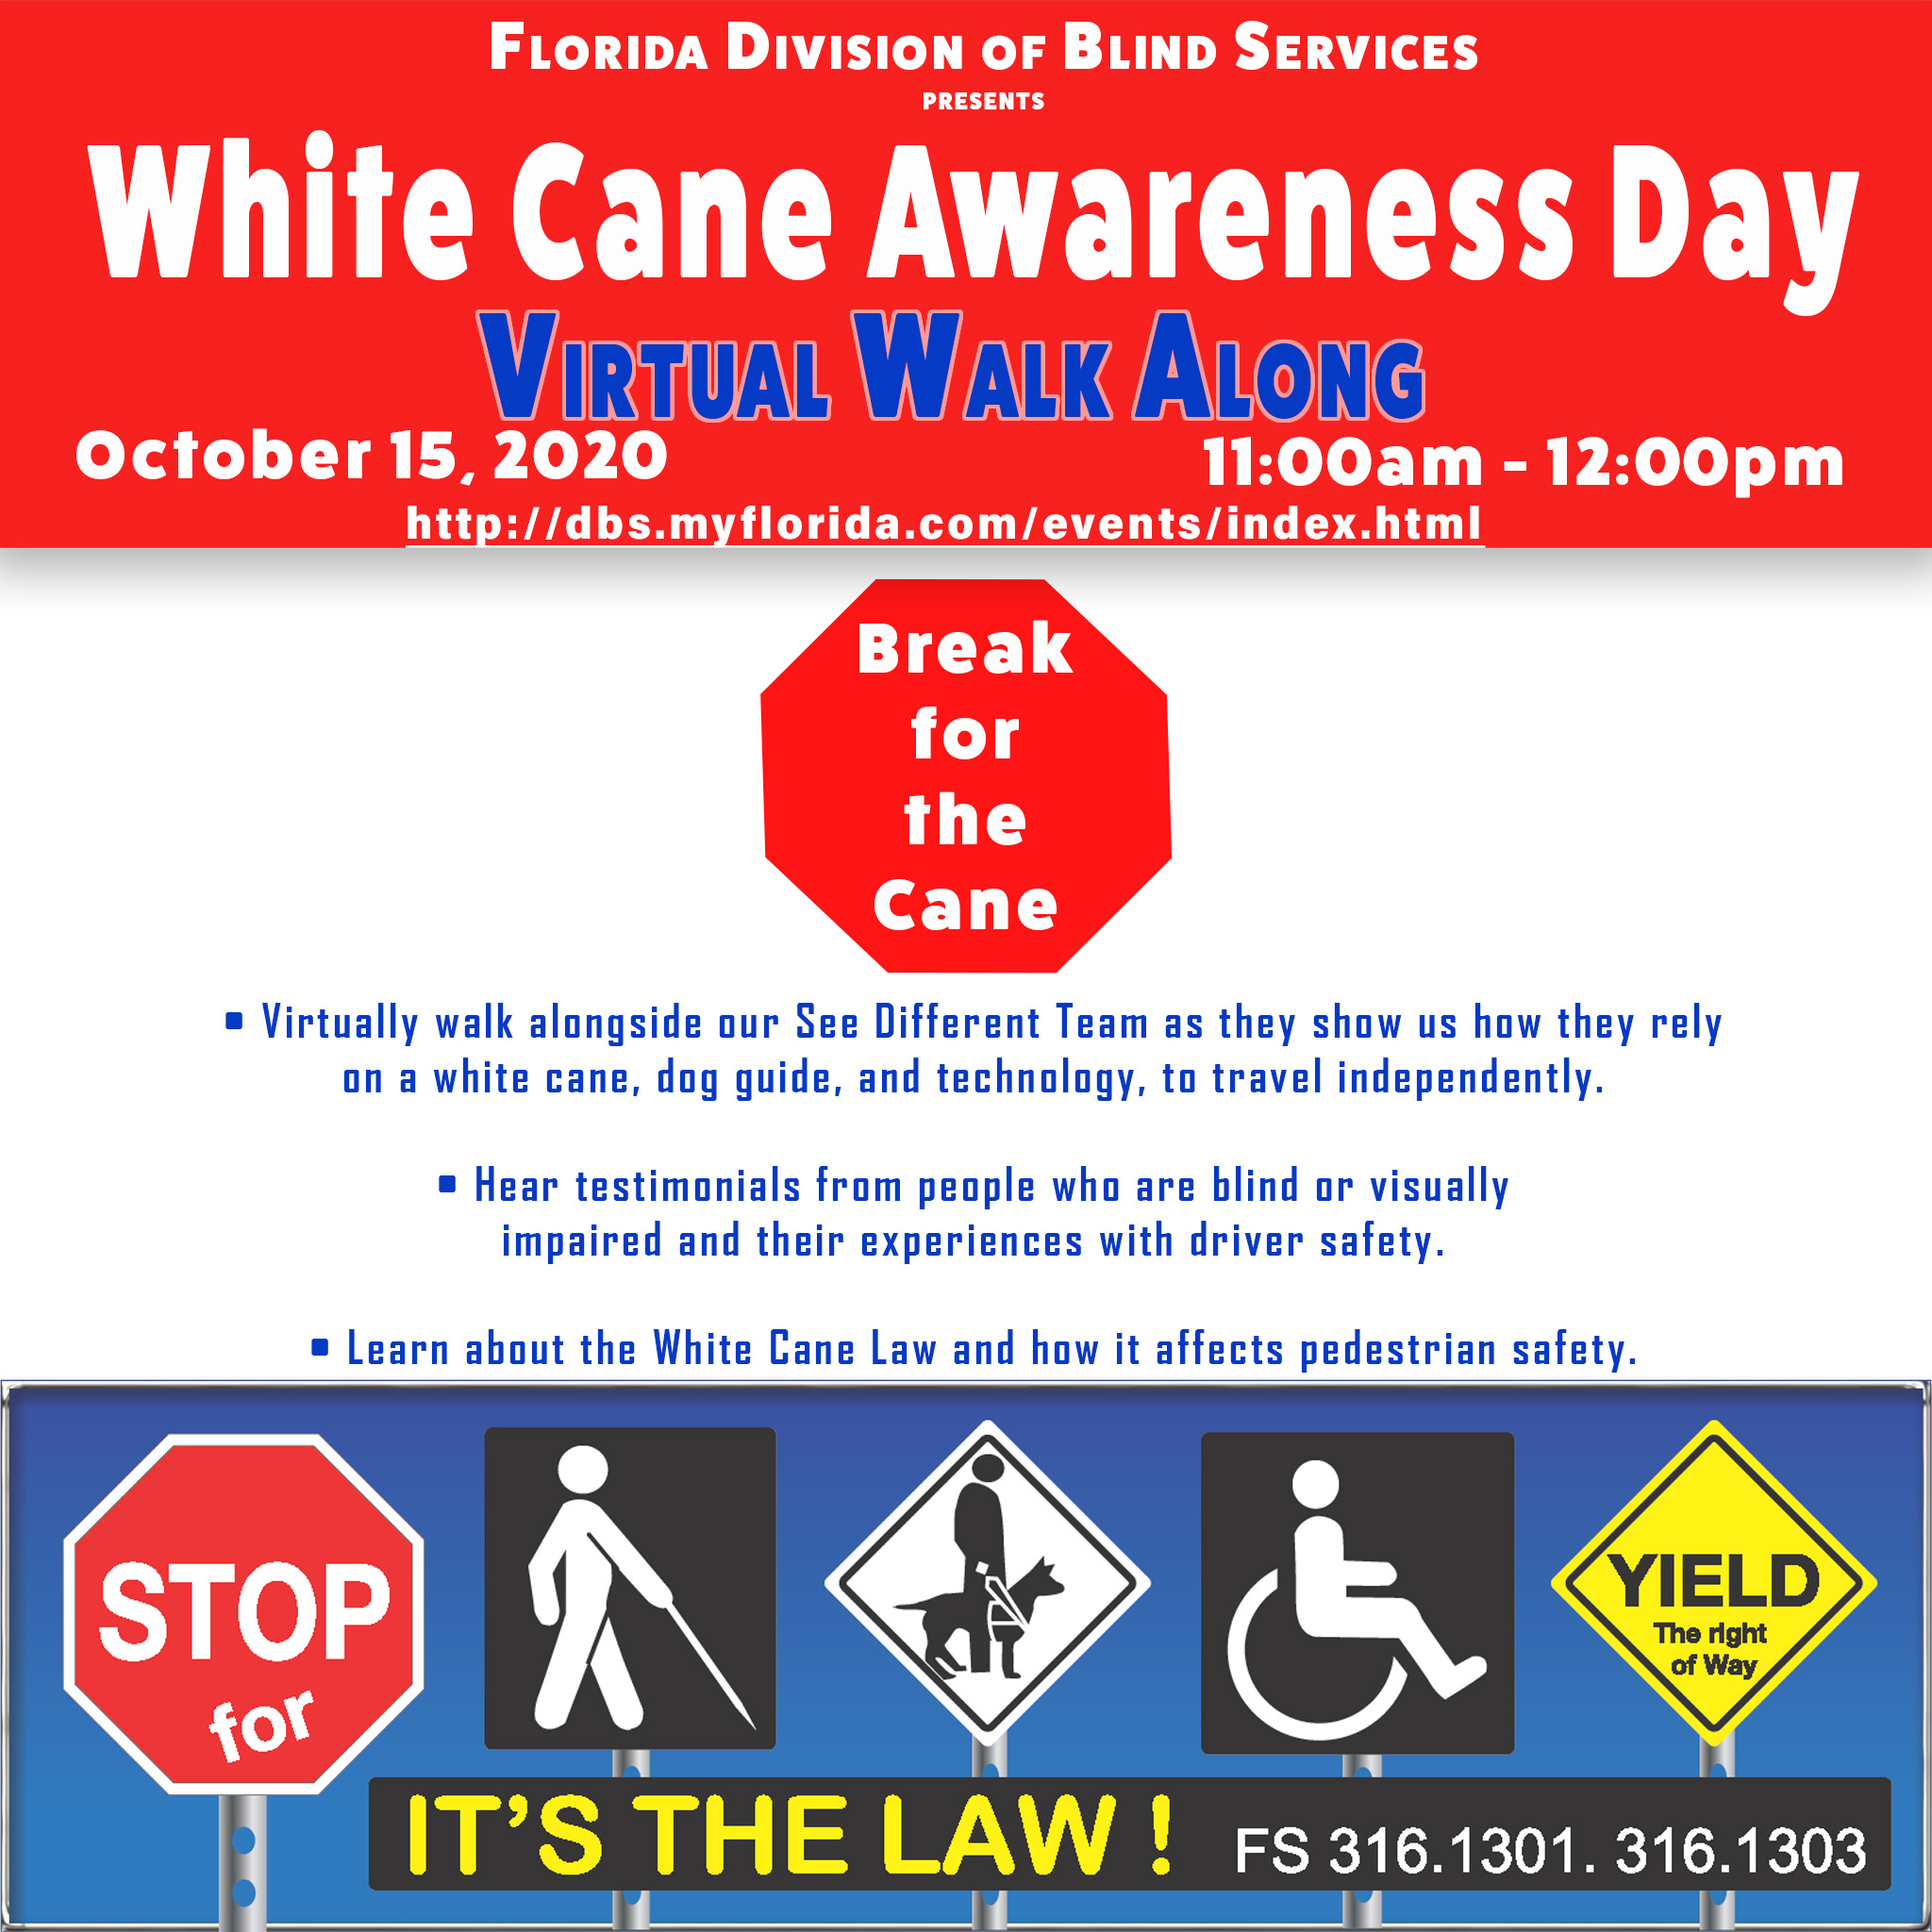 Division of Blind Services White Cane Awareness Day Virtual Walk Along event flyer.